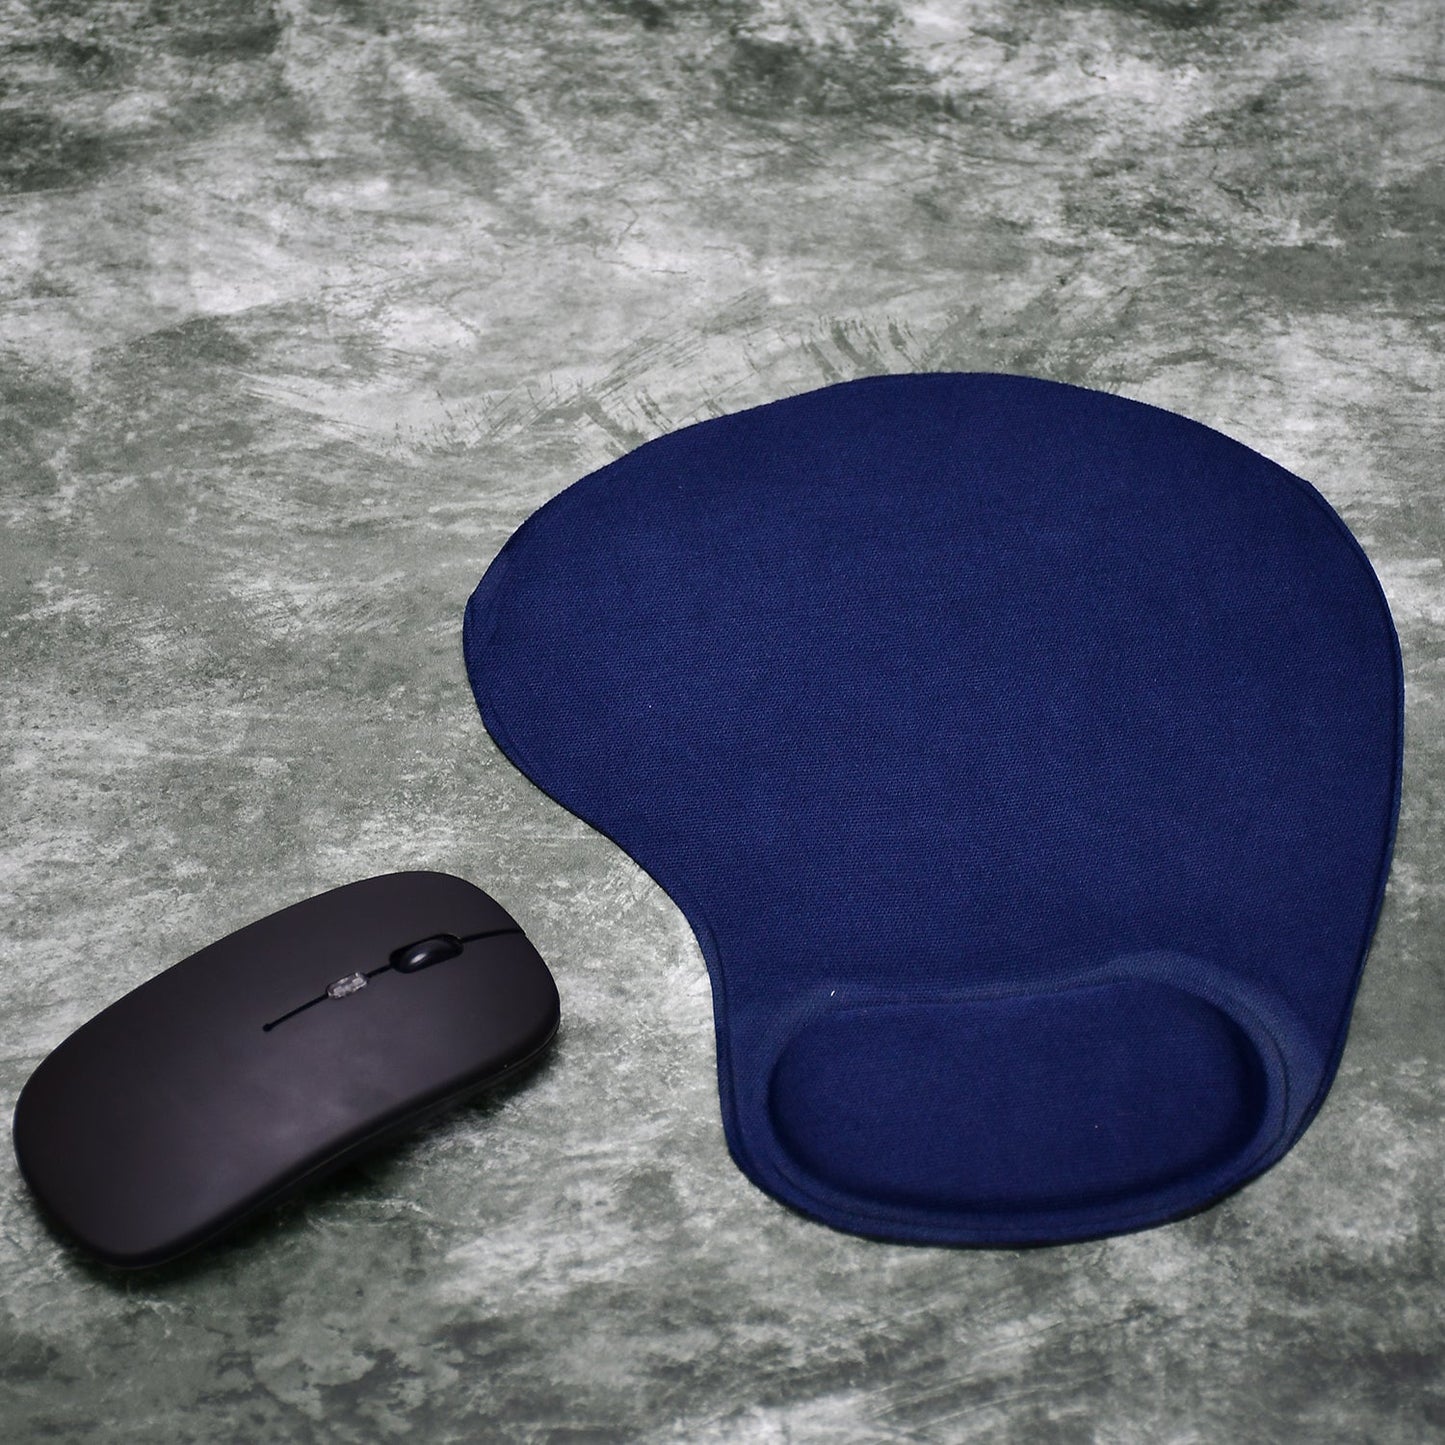 6161A WRIST S MOUSE PAD USED FOR MOUSE WHILE USING COMPUTER. DeoDap